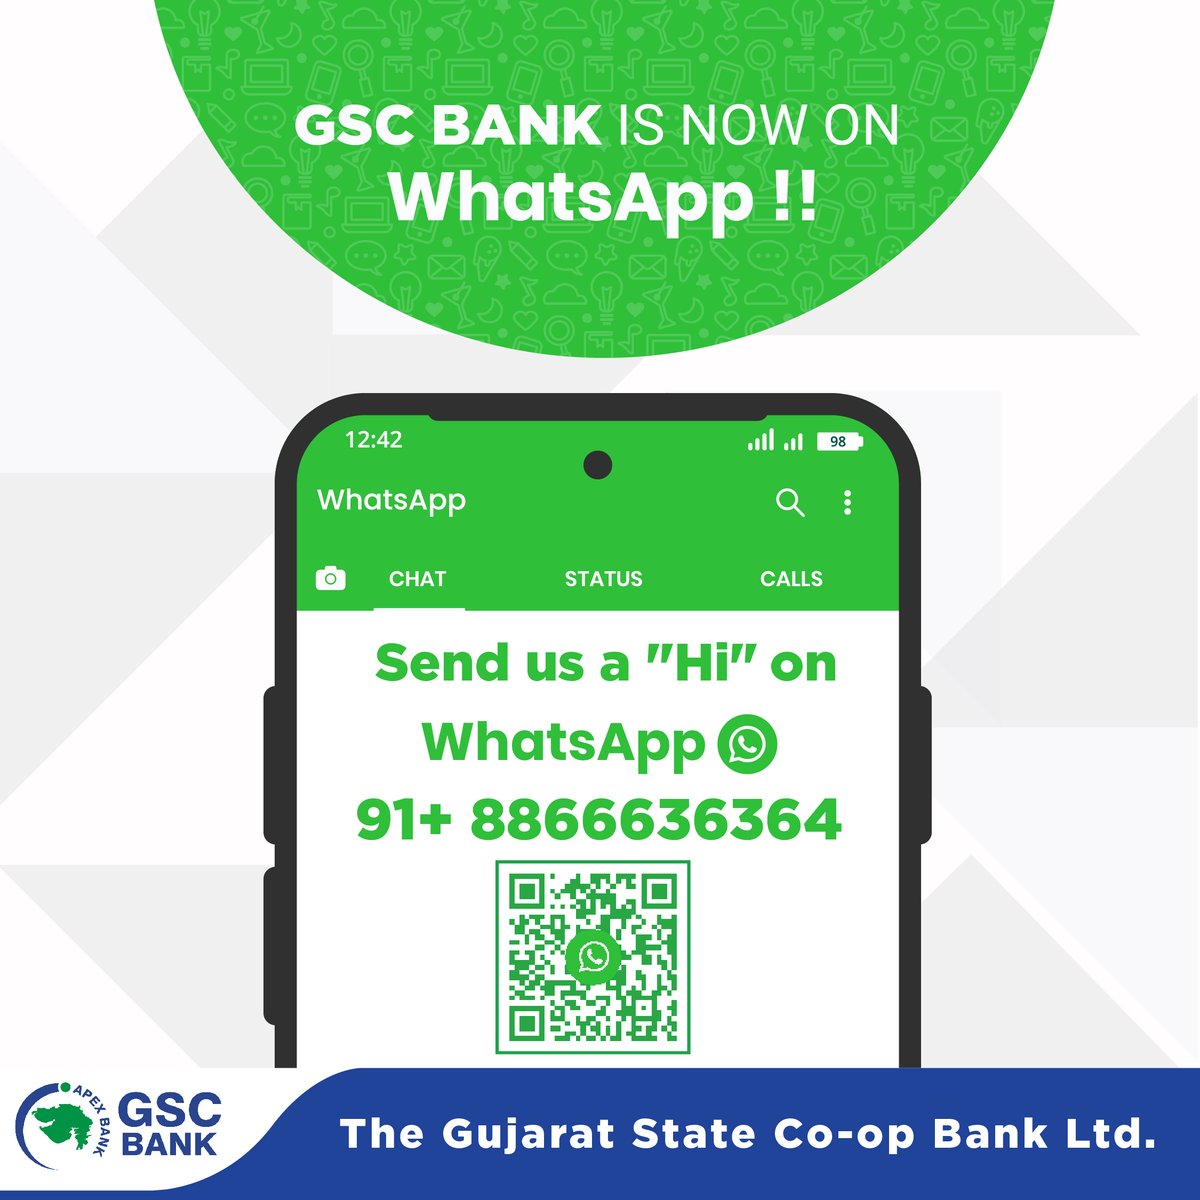 GSC BANK IS NOW ON WhatsApp.
JUST SAY 'Hi' on +91-8866636364 FOR A SEAMLESS BANKING EXPERIENCE.
#GSCB #WhatsApp #bankingservices #WhatsAppBanking #JustSayHi #onlinebanking #BalanceInquiry #BankingInfo #statement #interestrates #DigitalBanking